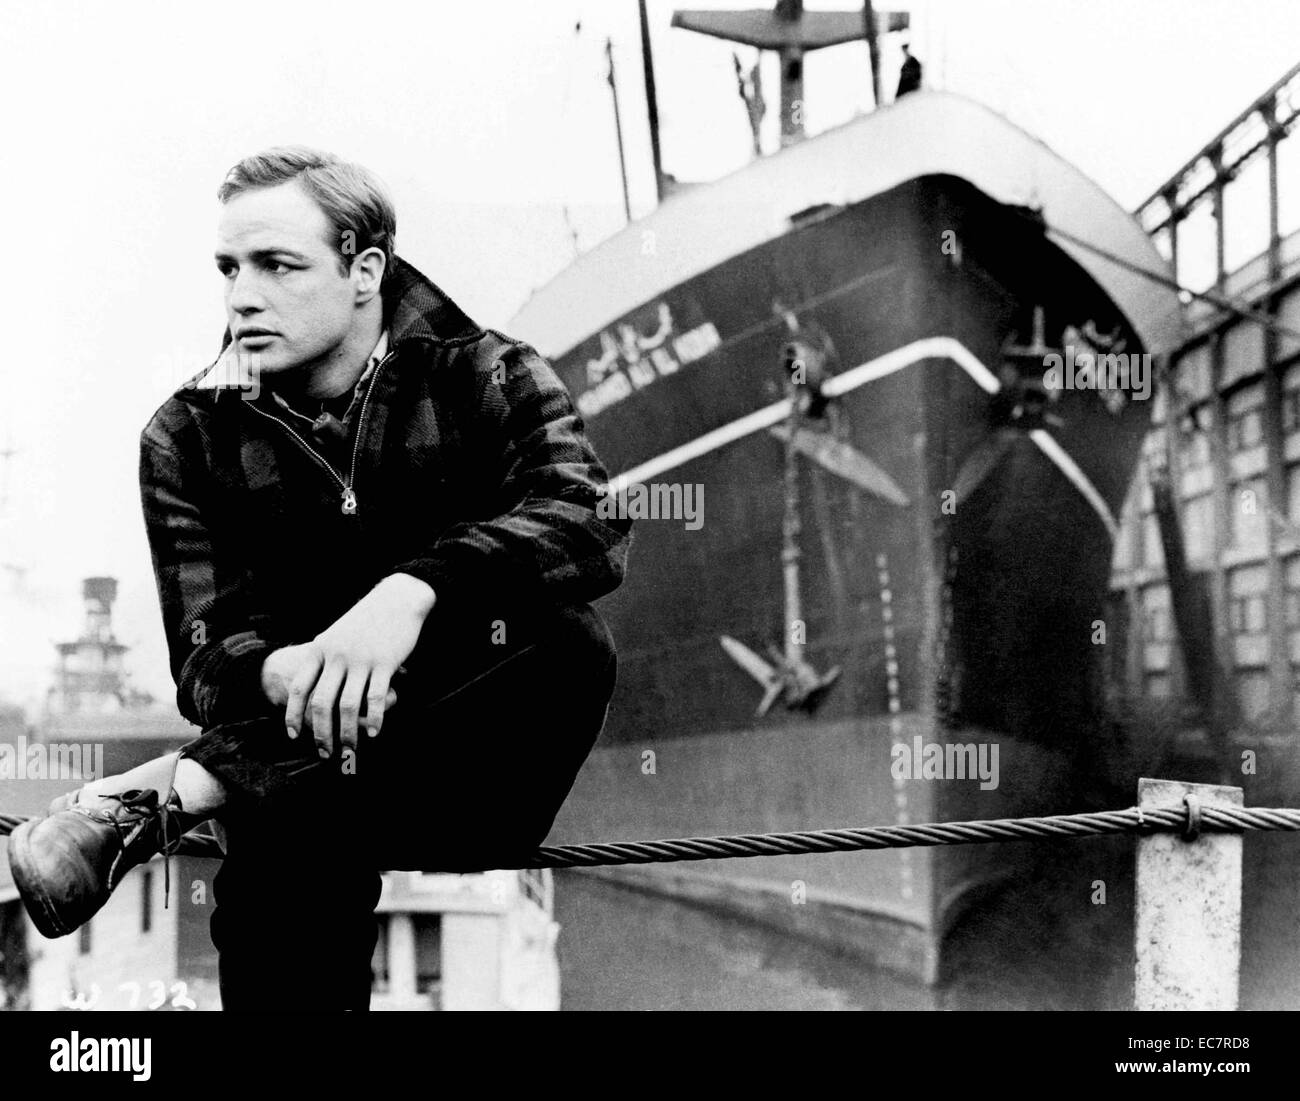 On the Waterfront is a 1954 American crime drama film about union violence and corruption among longshoremen. Directed by Elia Kazan and starring Marlon Brando the film was based on Crime on the Waterfront - a series of articles published in the New York Sun by Malcolm Johnson. Stock Photo